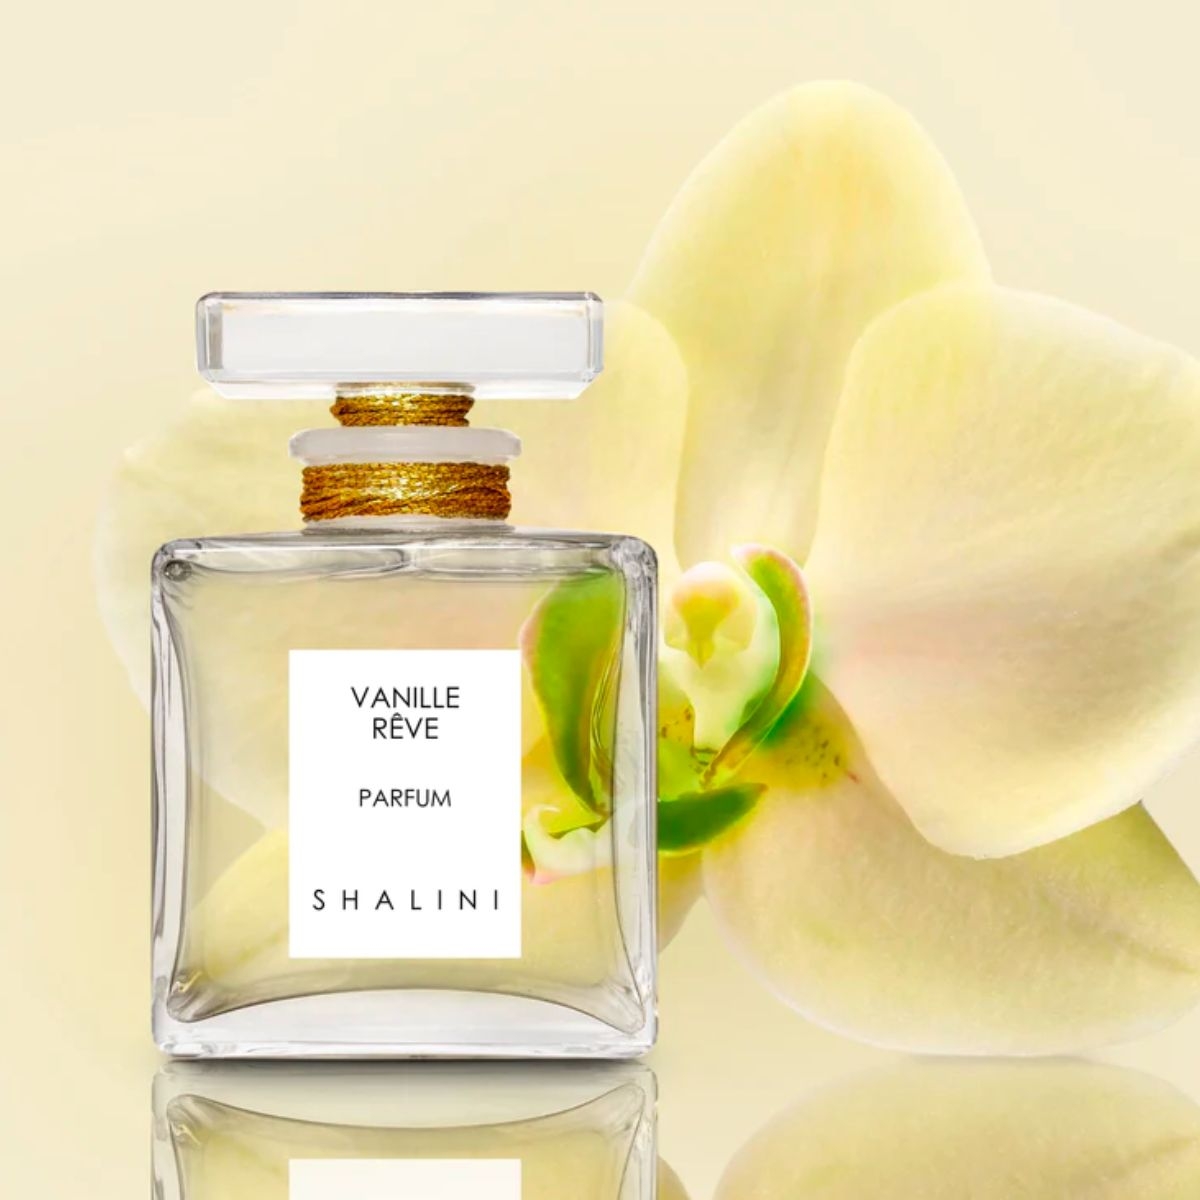 Image of Vanille Reve glass stopper by the perfume brand Shalini